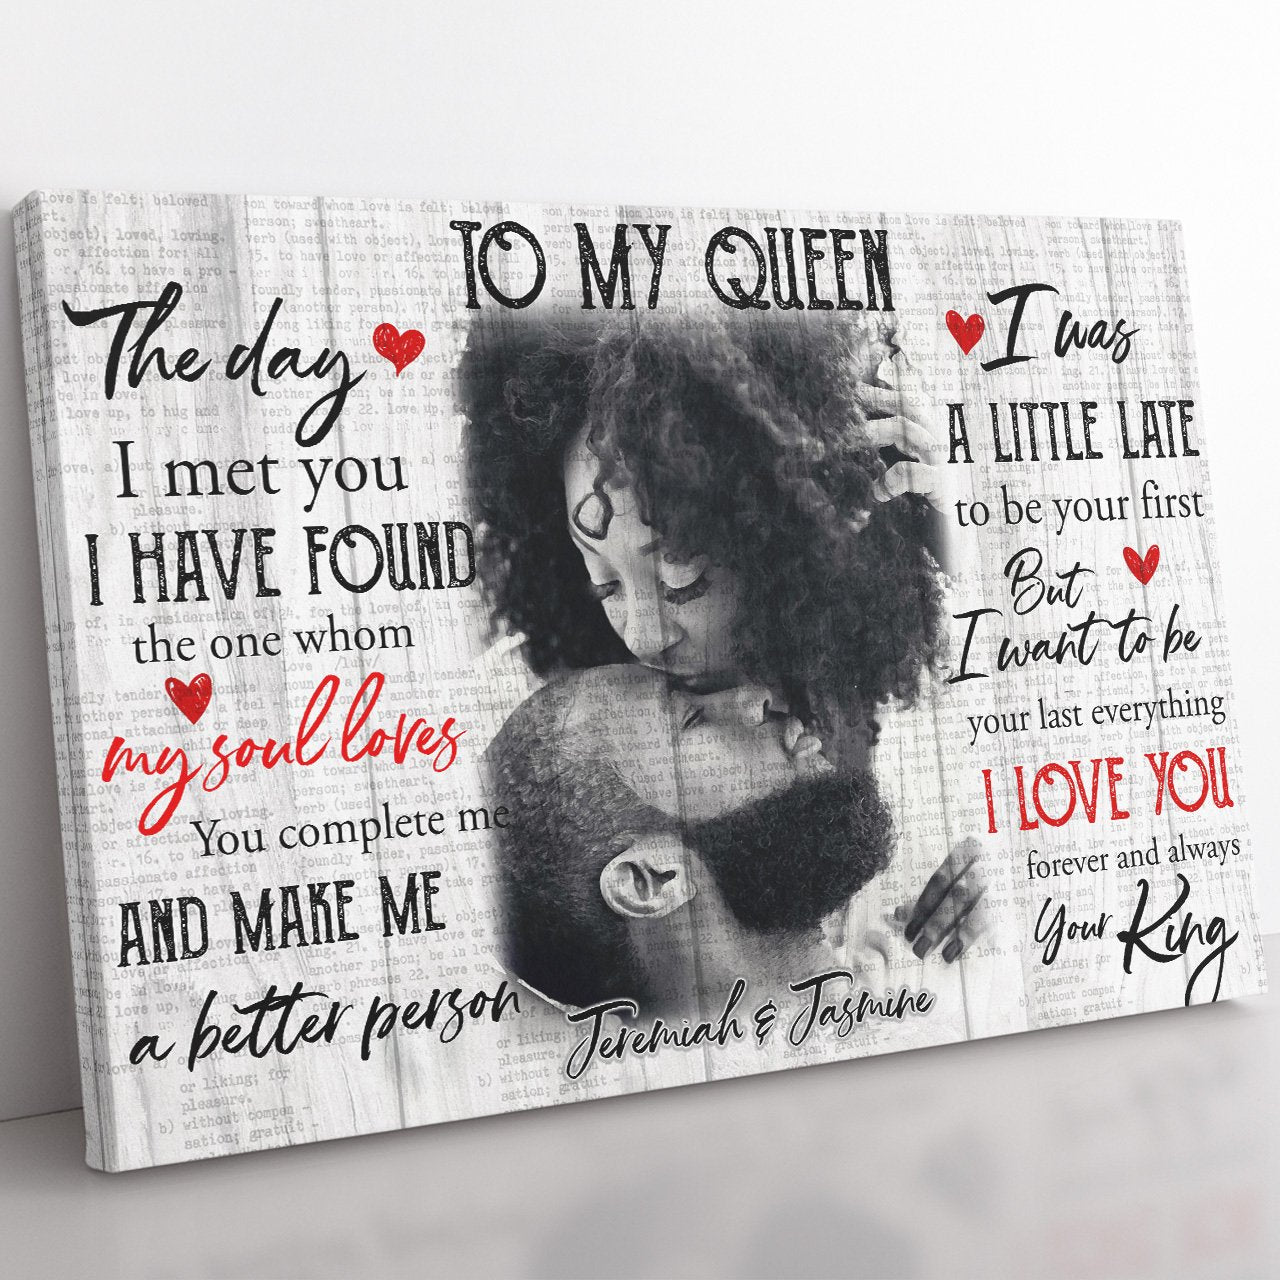 Personalized Gift Canvas for Black Wife, The Day I Met You Canvas, I Want to be Your Last Everything Canvas for Queen, Birthday Gift Ideas For Her